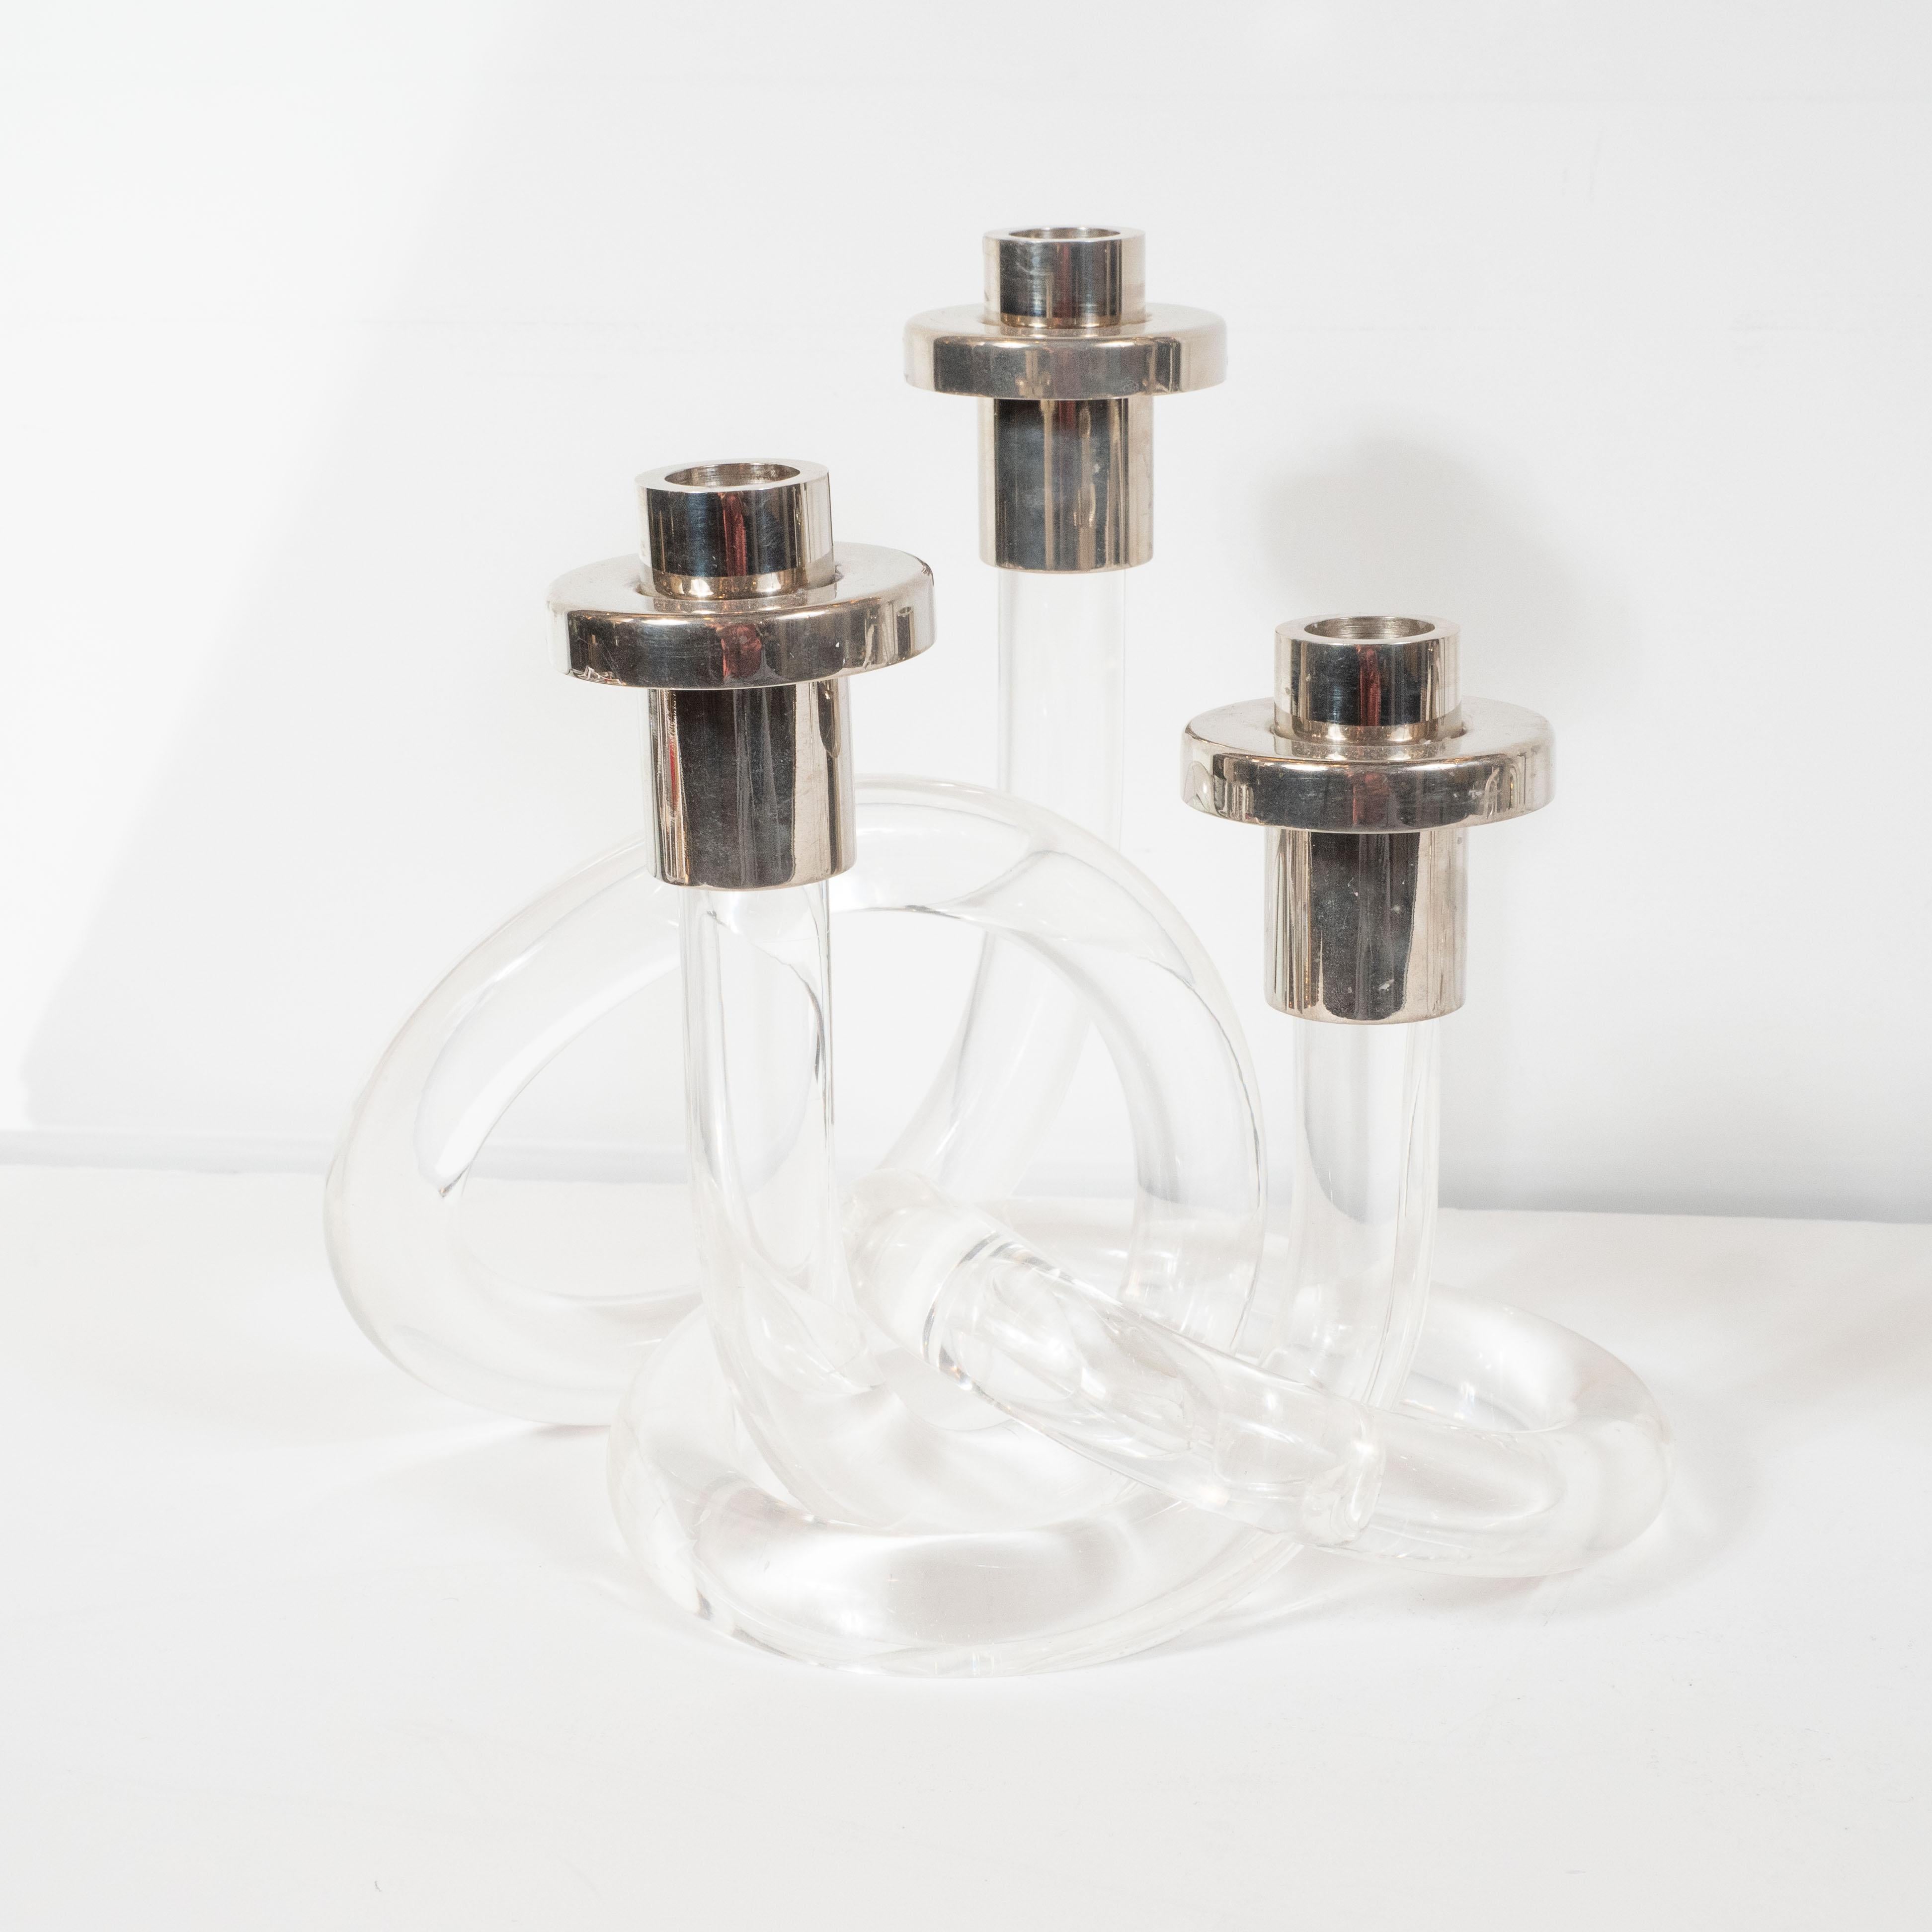 American Pair of Midcentury Lucite and Nickel Candlesticks by Dorothy Thorpe